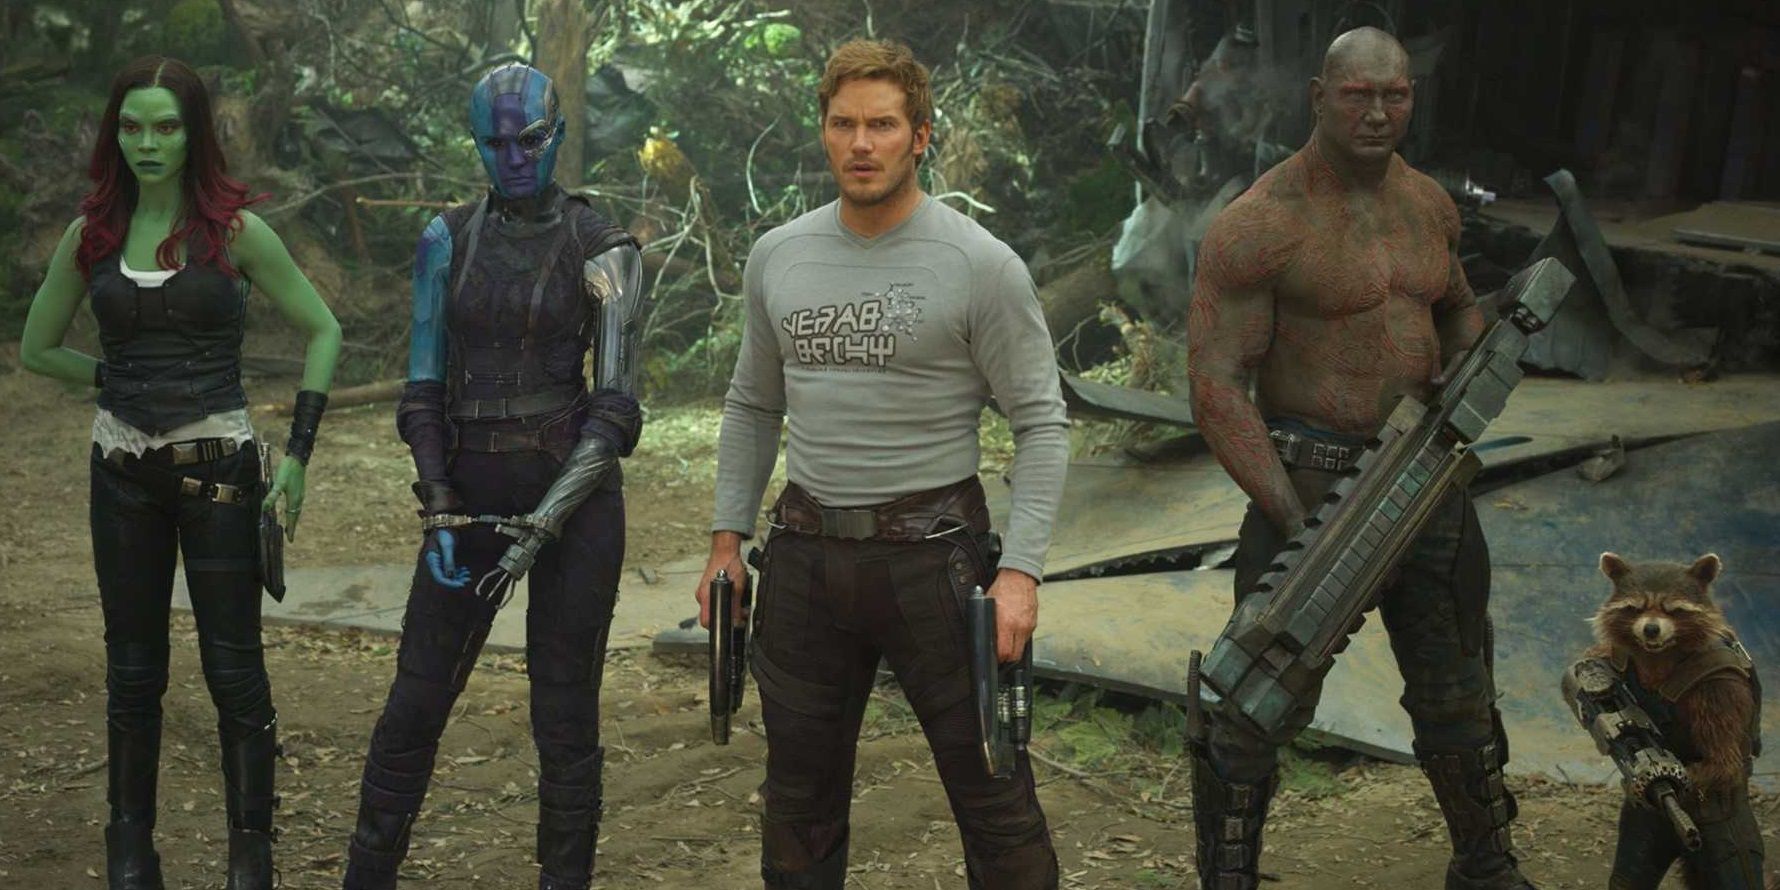 The Guardians standing outside their ship in Guardians of the Galaxy Vol 2